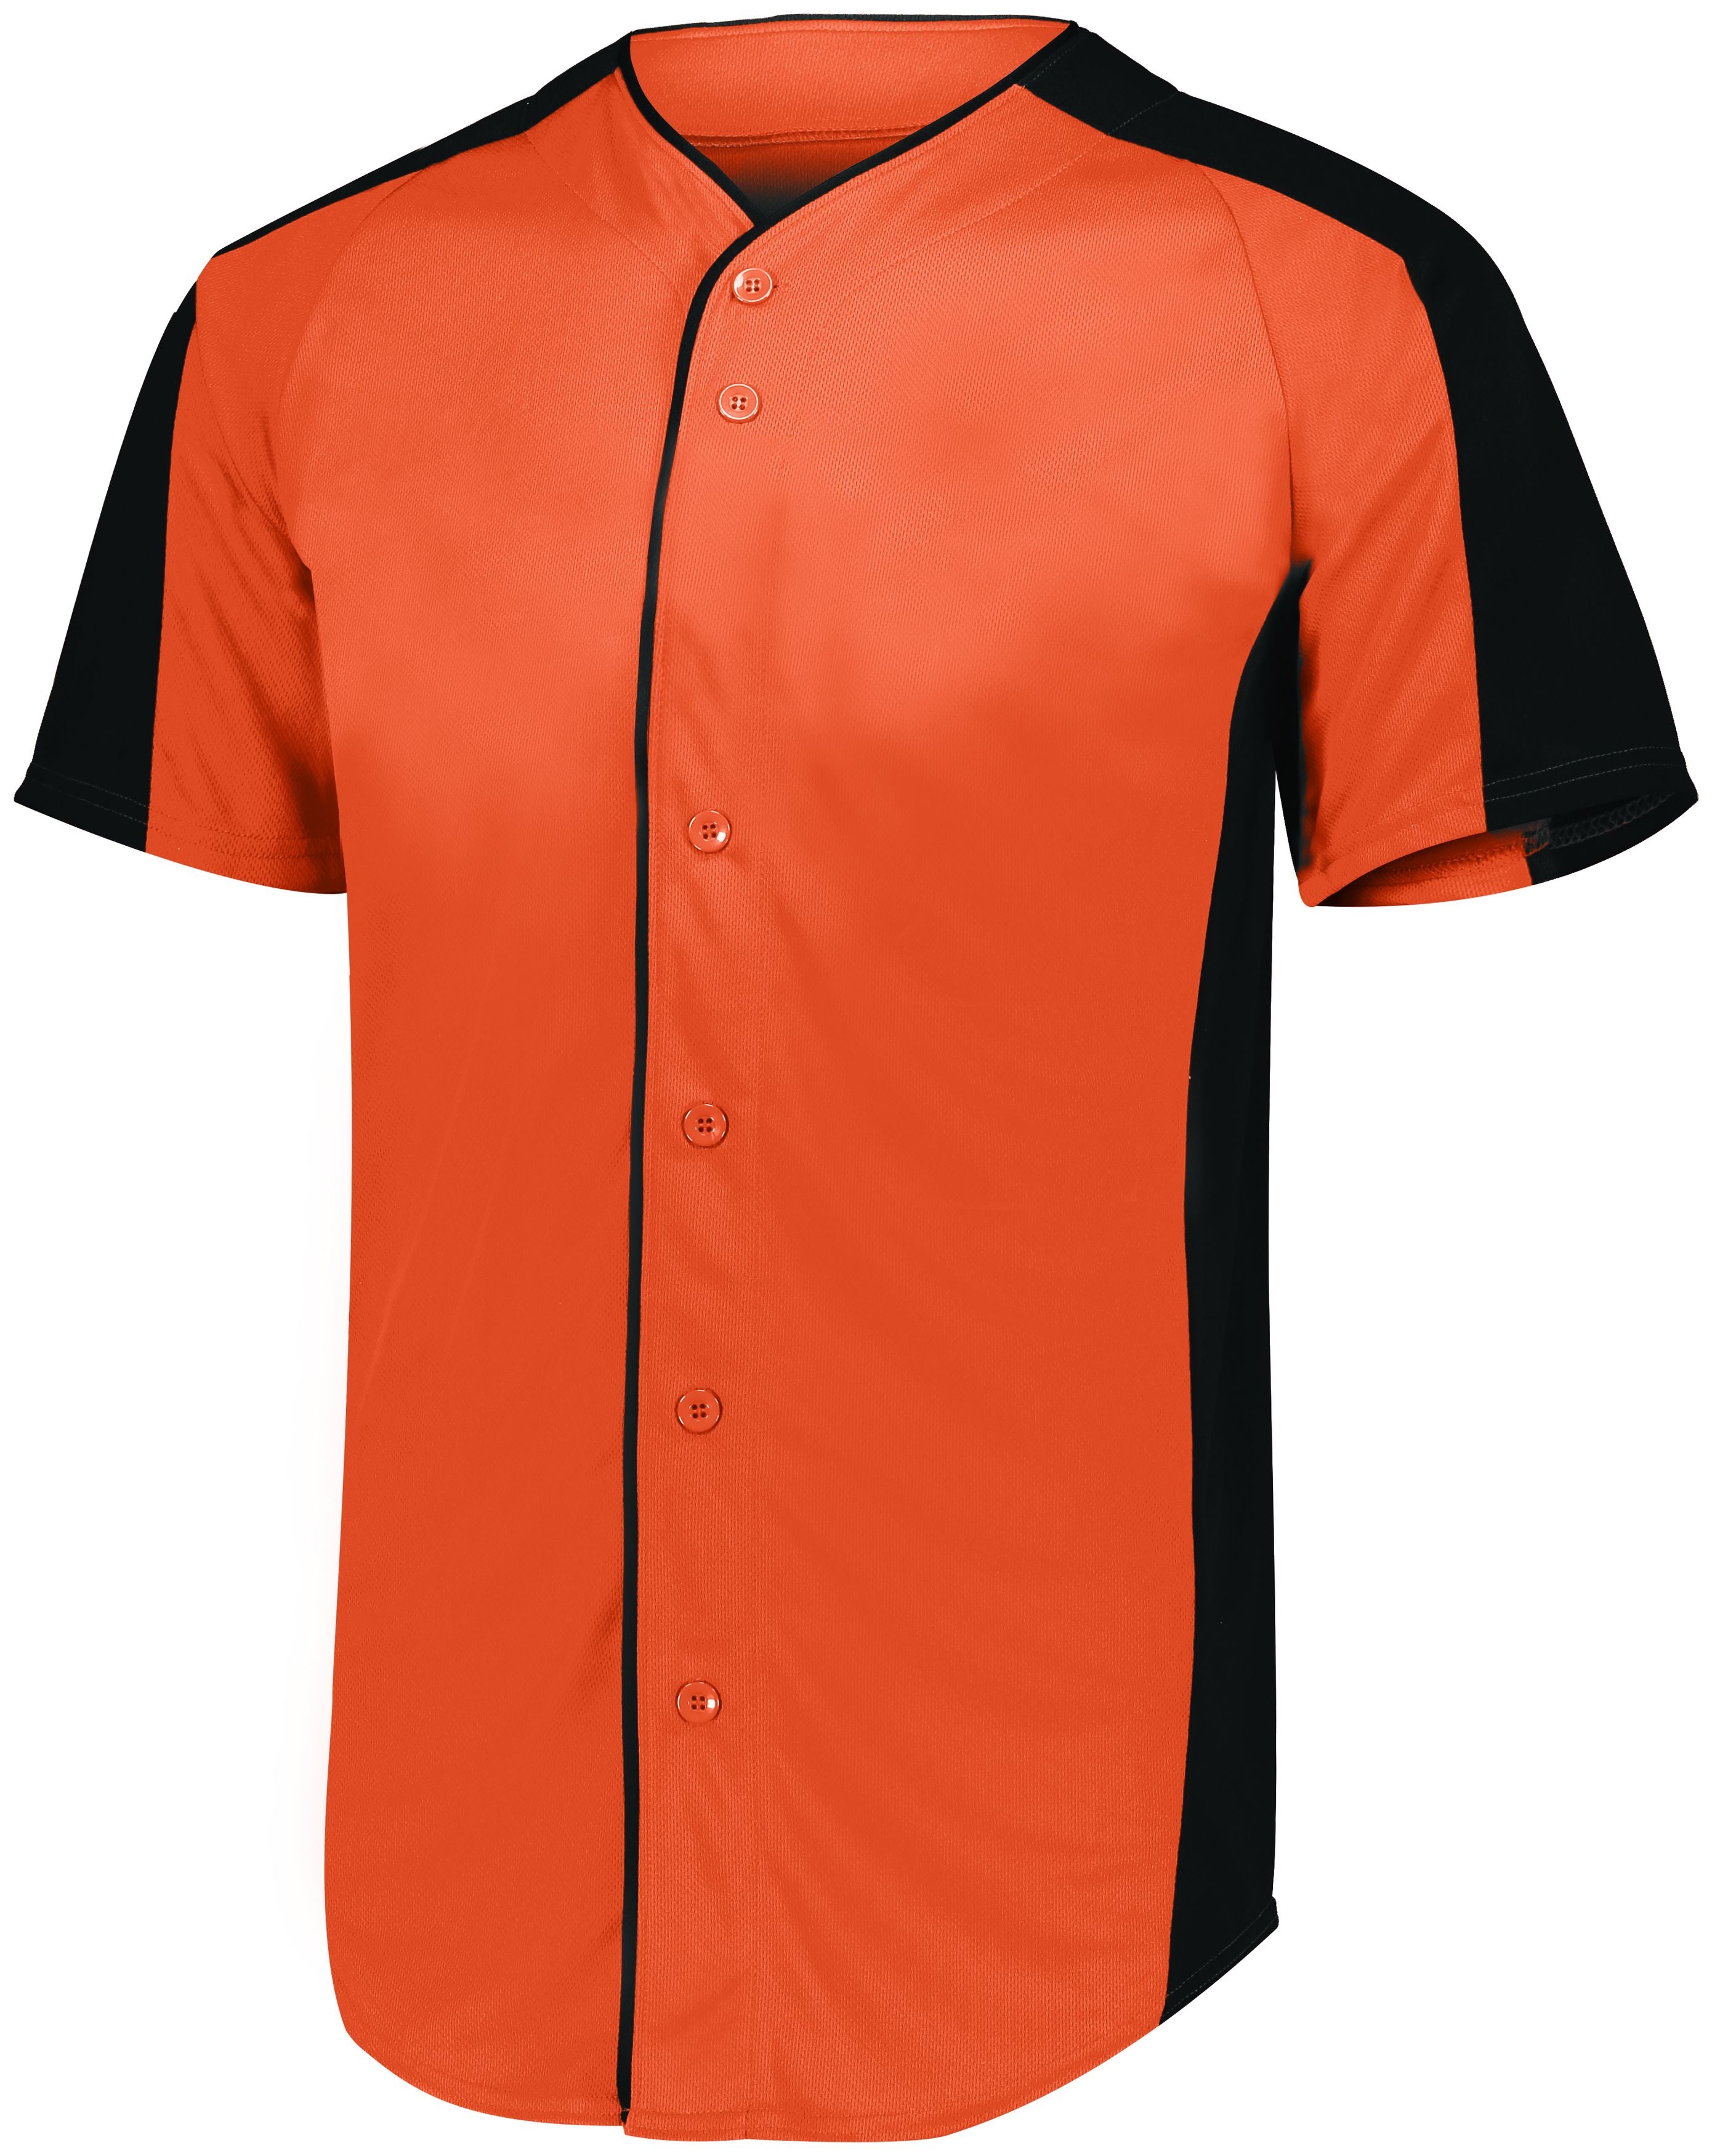 Augusta Sportswear Full-Button Baseball Jersey in Orange/Black  -Part of the Adult, Adult-Jersey, Augusta-Products, Baseball, Shirts, All-Sports, All-Sports-1 product lines at KanaleyCreations.com